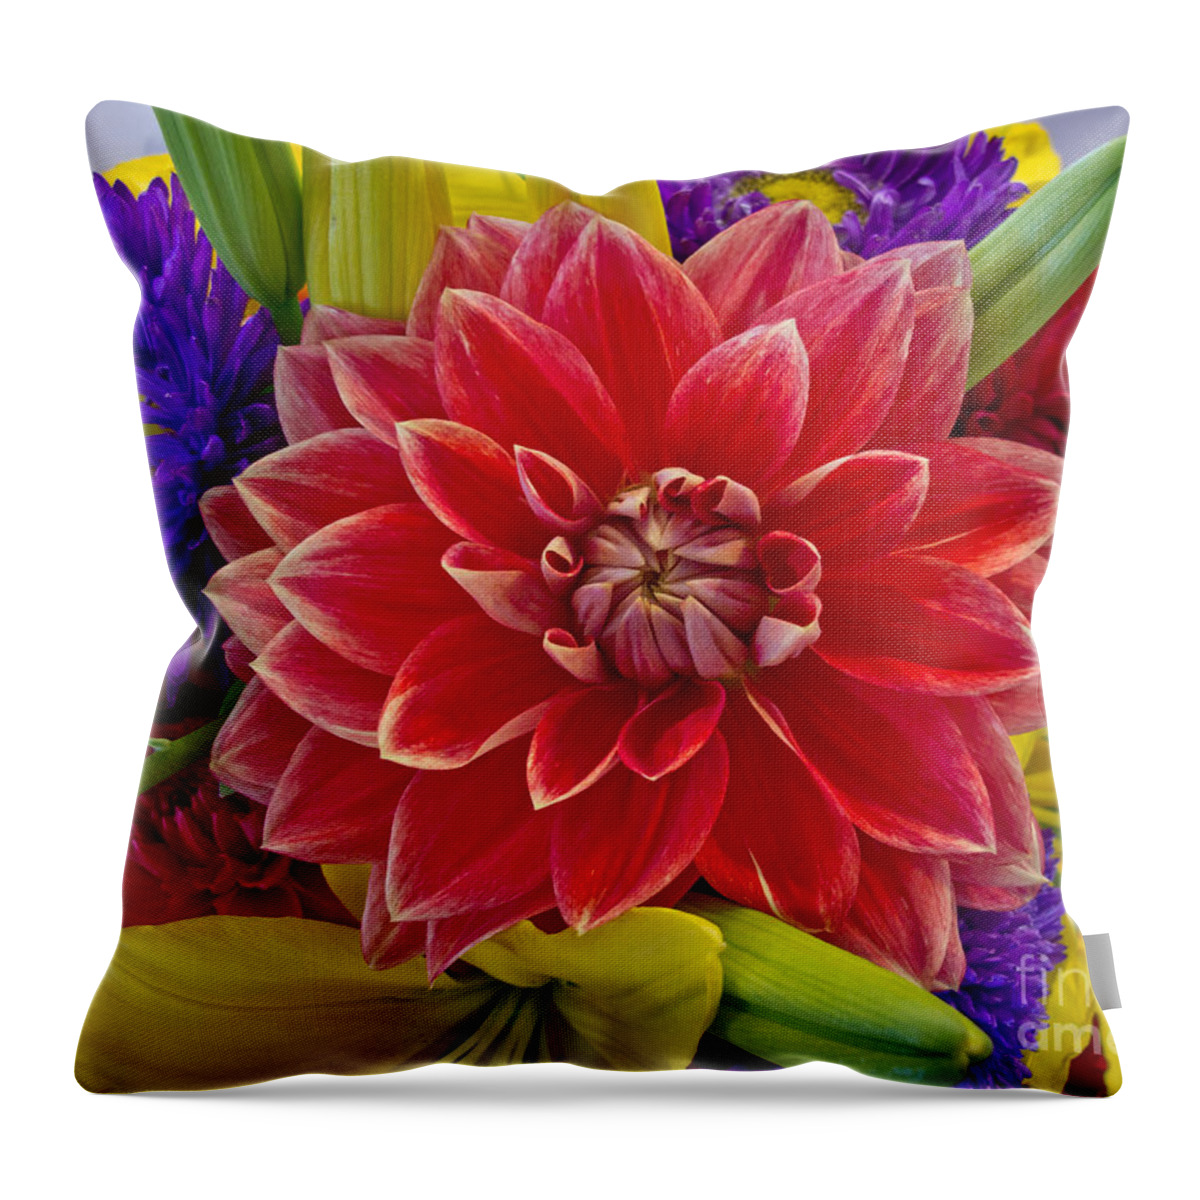 Dahlia Throw Pillow featuring the photograph Center Of Attention by Arlene Carmel